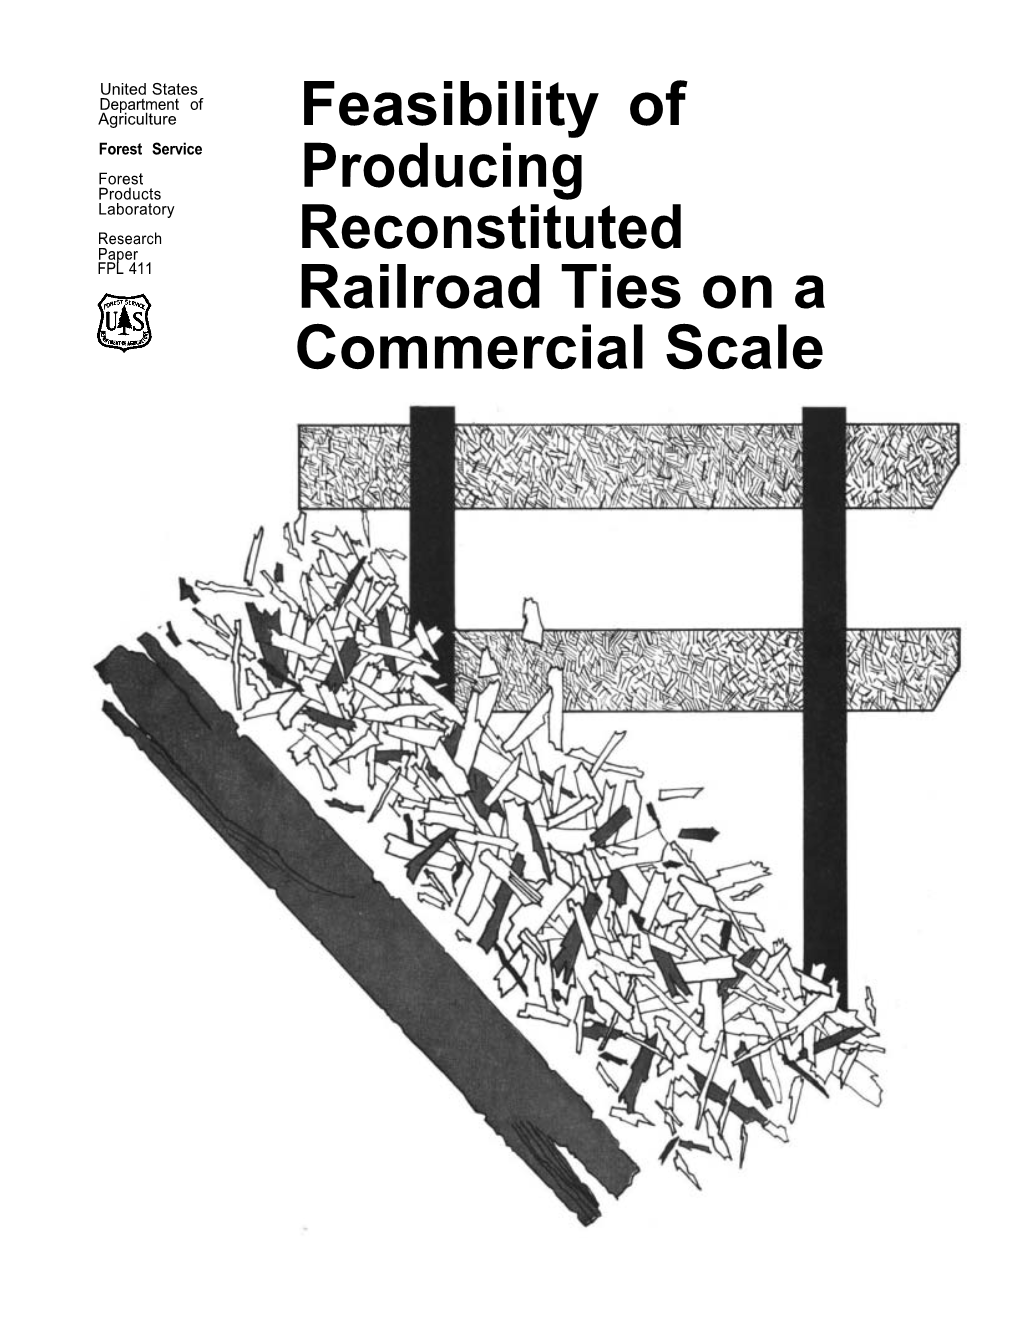 Feasibility of Producing Reconstituted Railroad Ties on a Commercial Scale, by Robert L